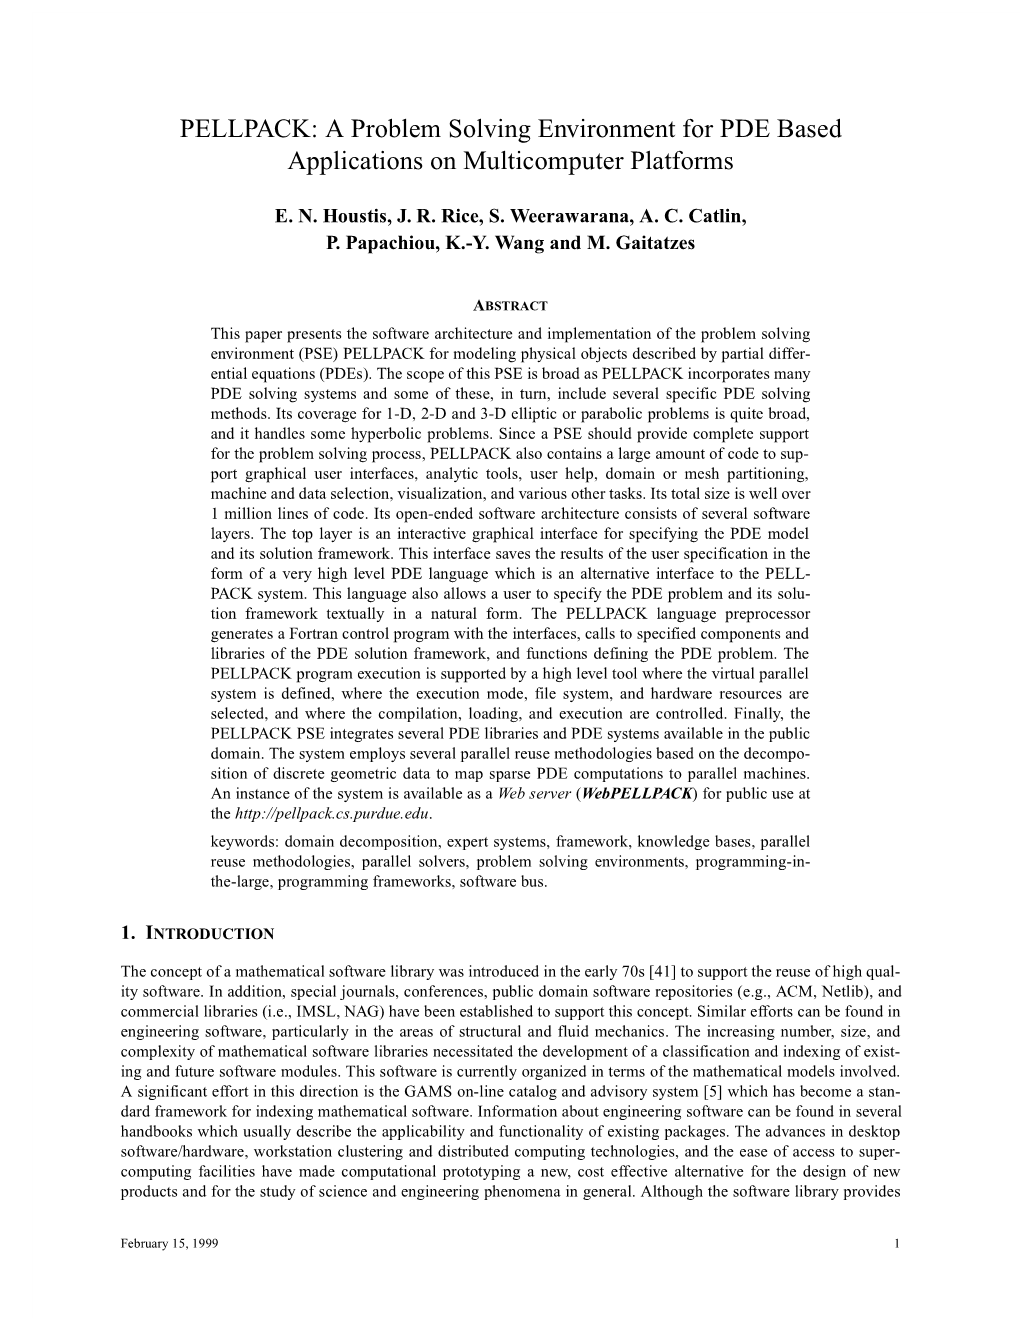 PELLPACK: a Problem Solving Environment for PDE Based Applications on Multicomputer Platforms